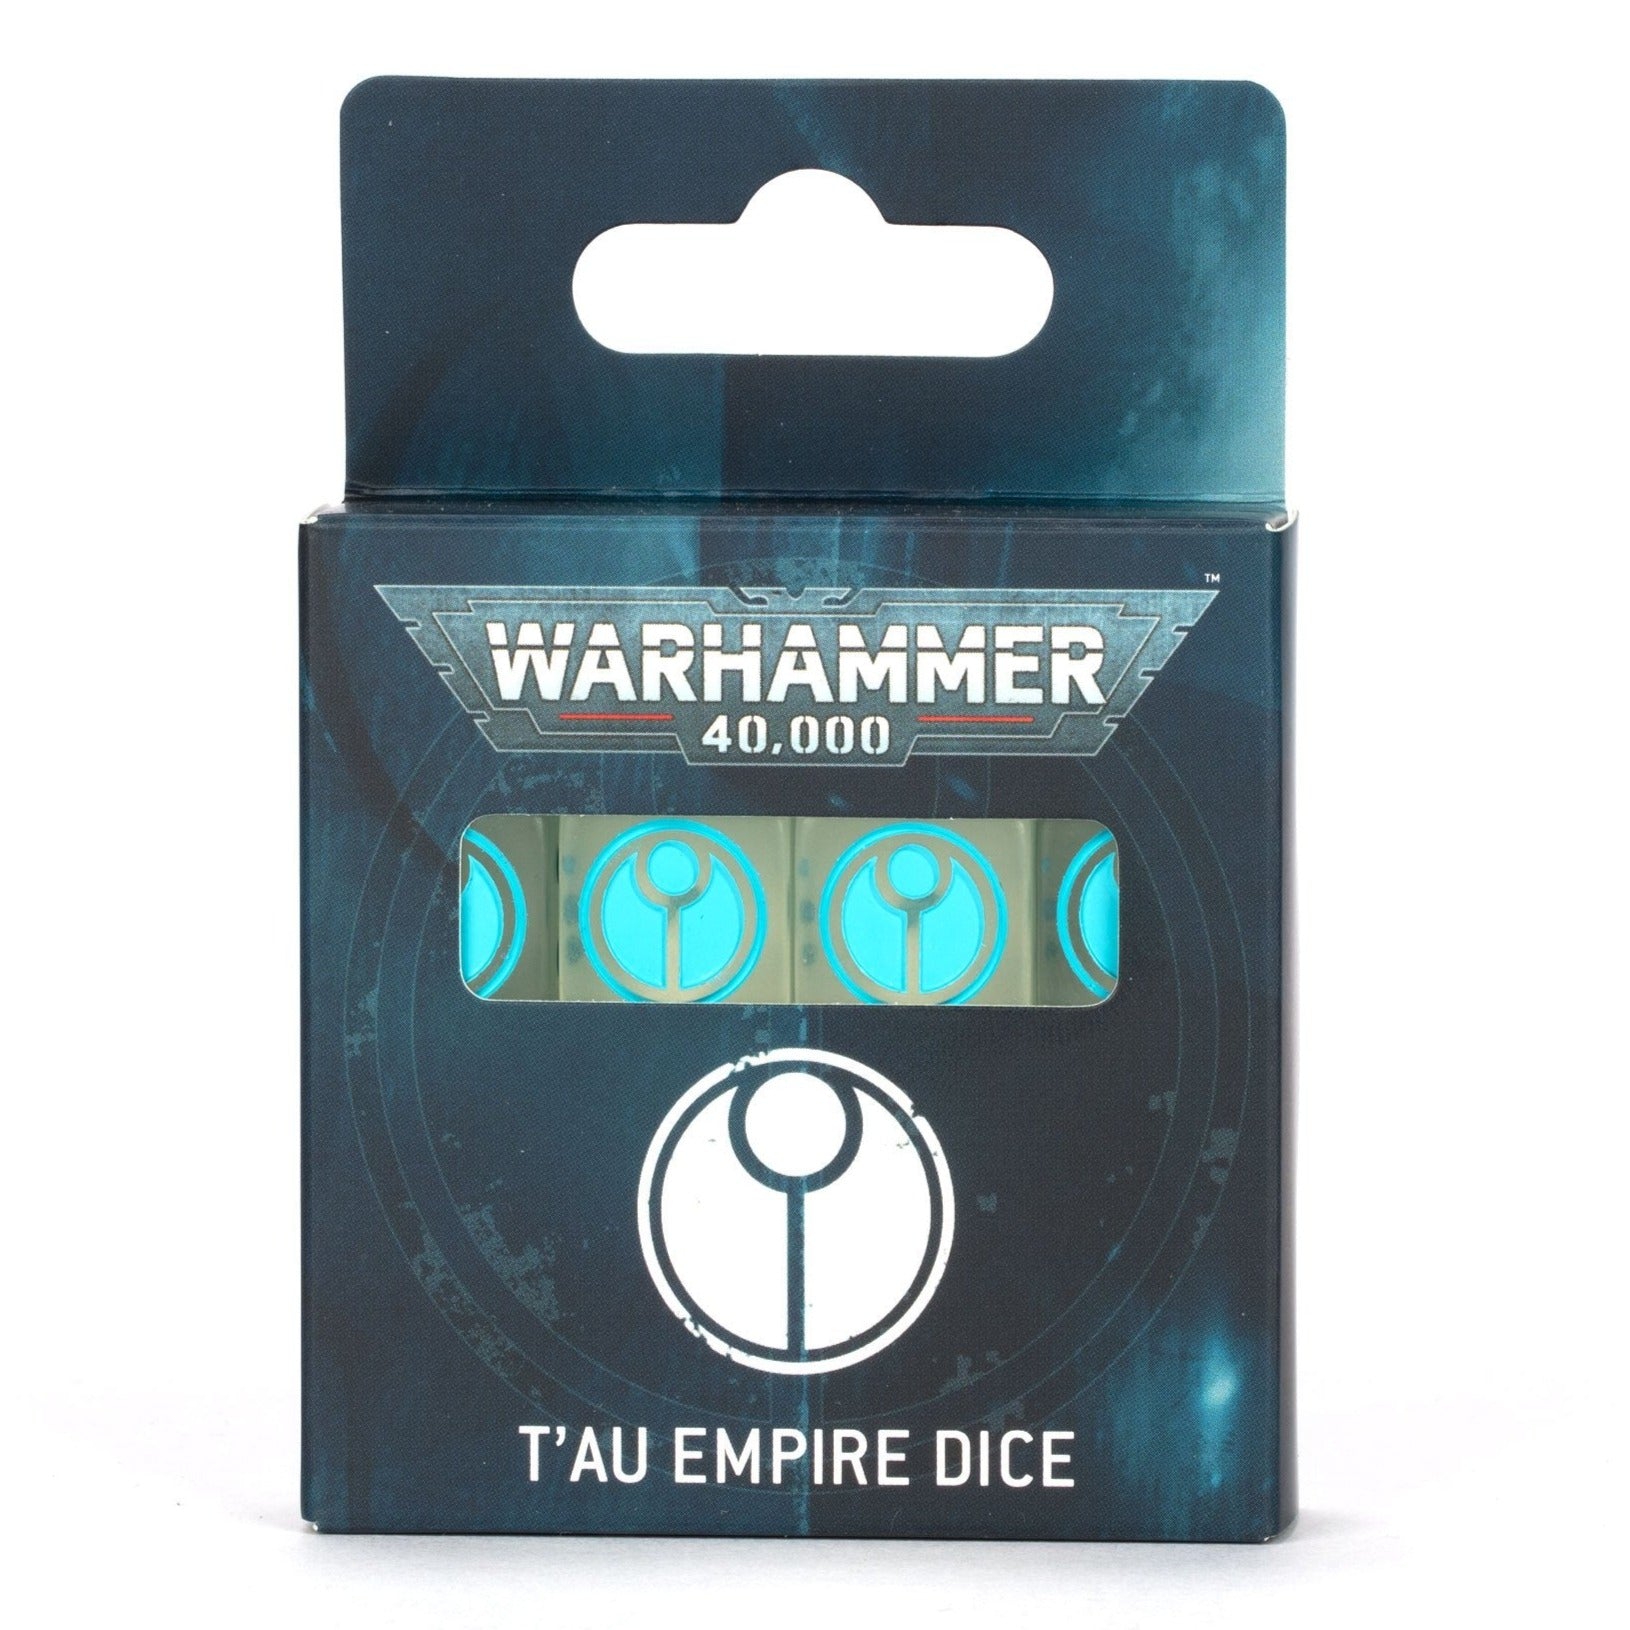 Warhammer 40,000: T'au Empire Dice - Release Date 11/5/24 - Loaded Dice